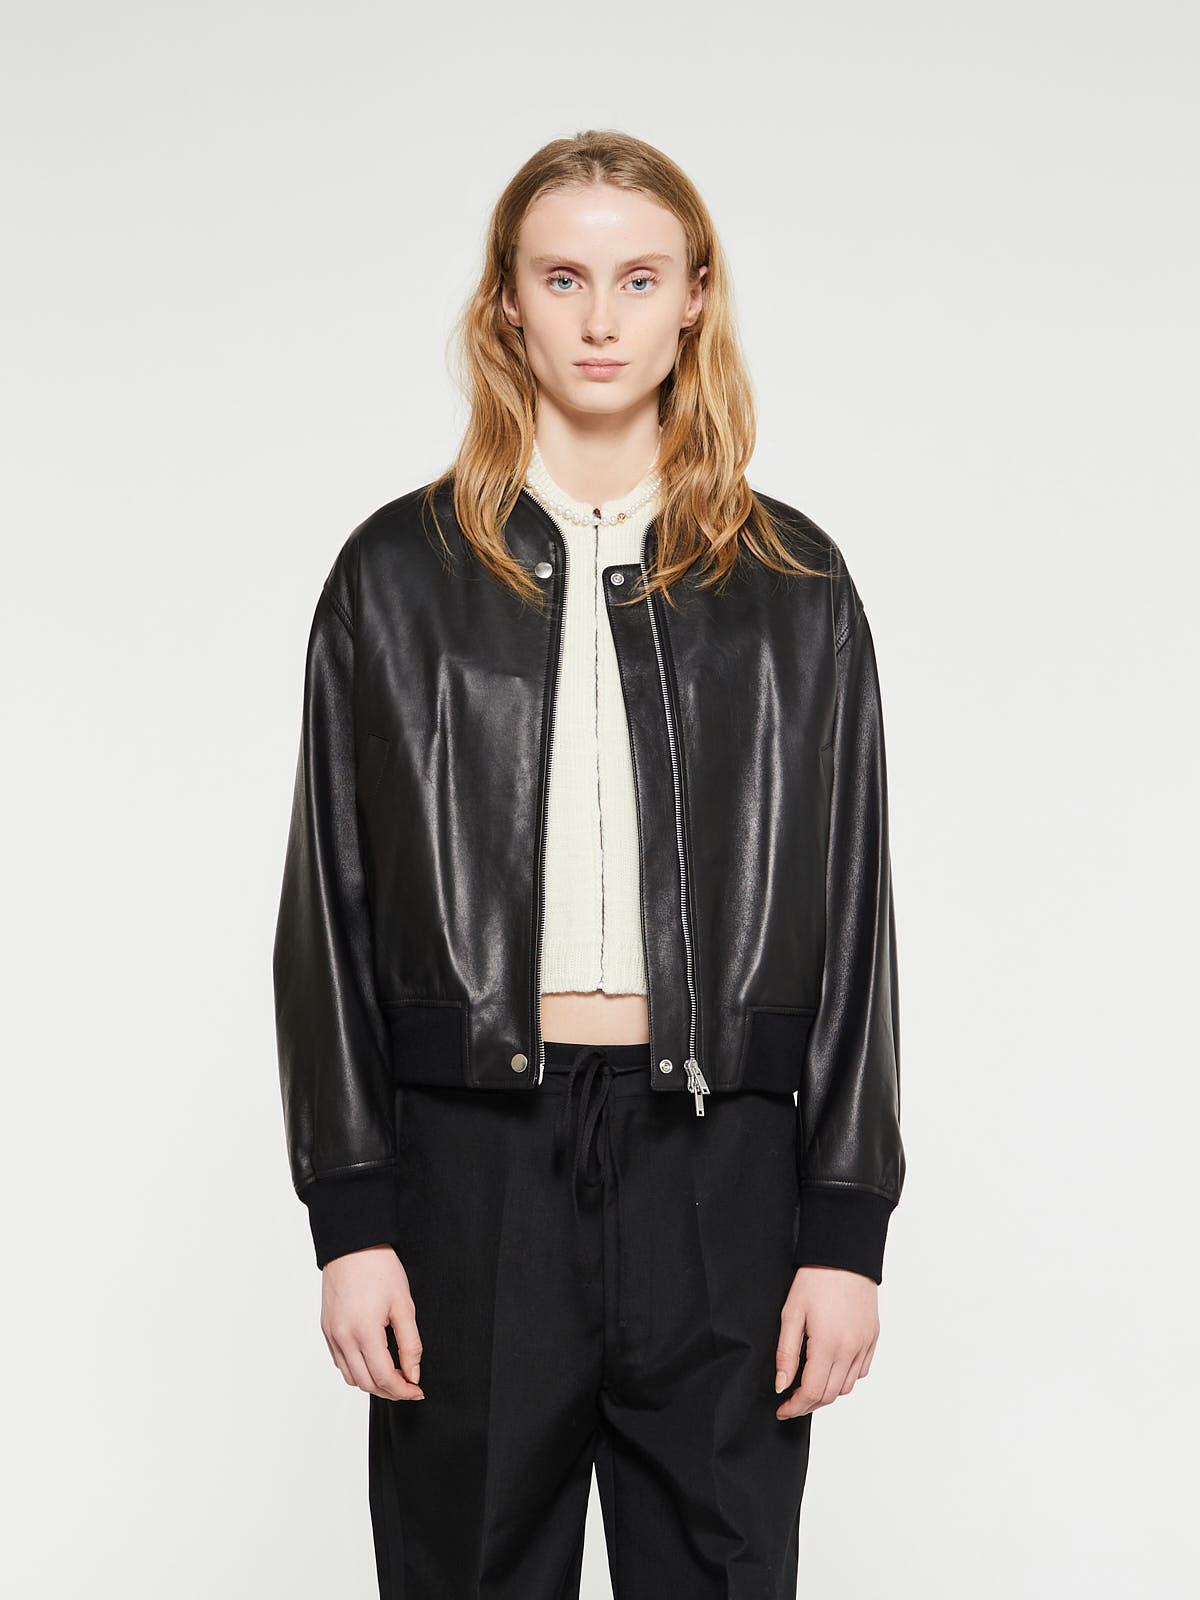 Coats & | stoy Shop Jackets the women at selection for